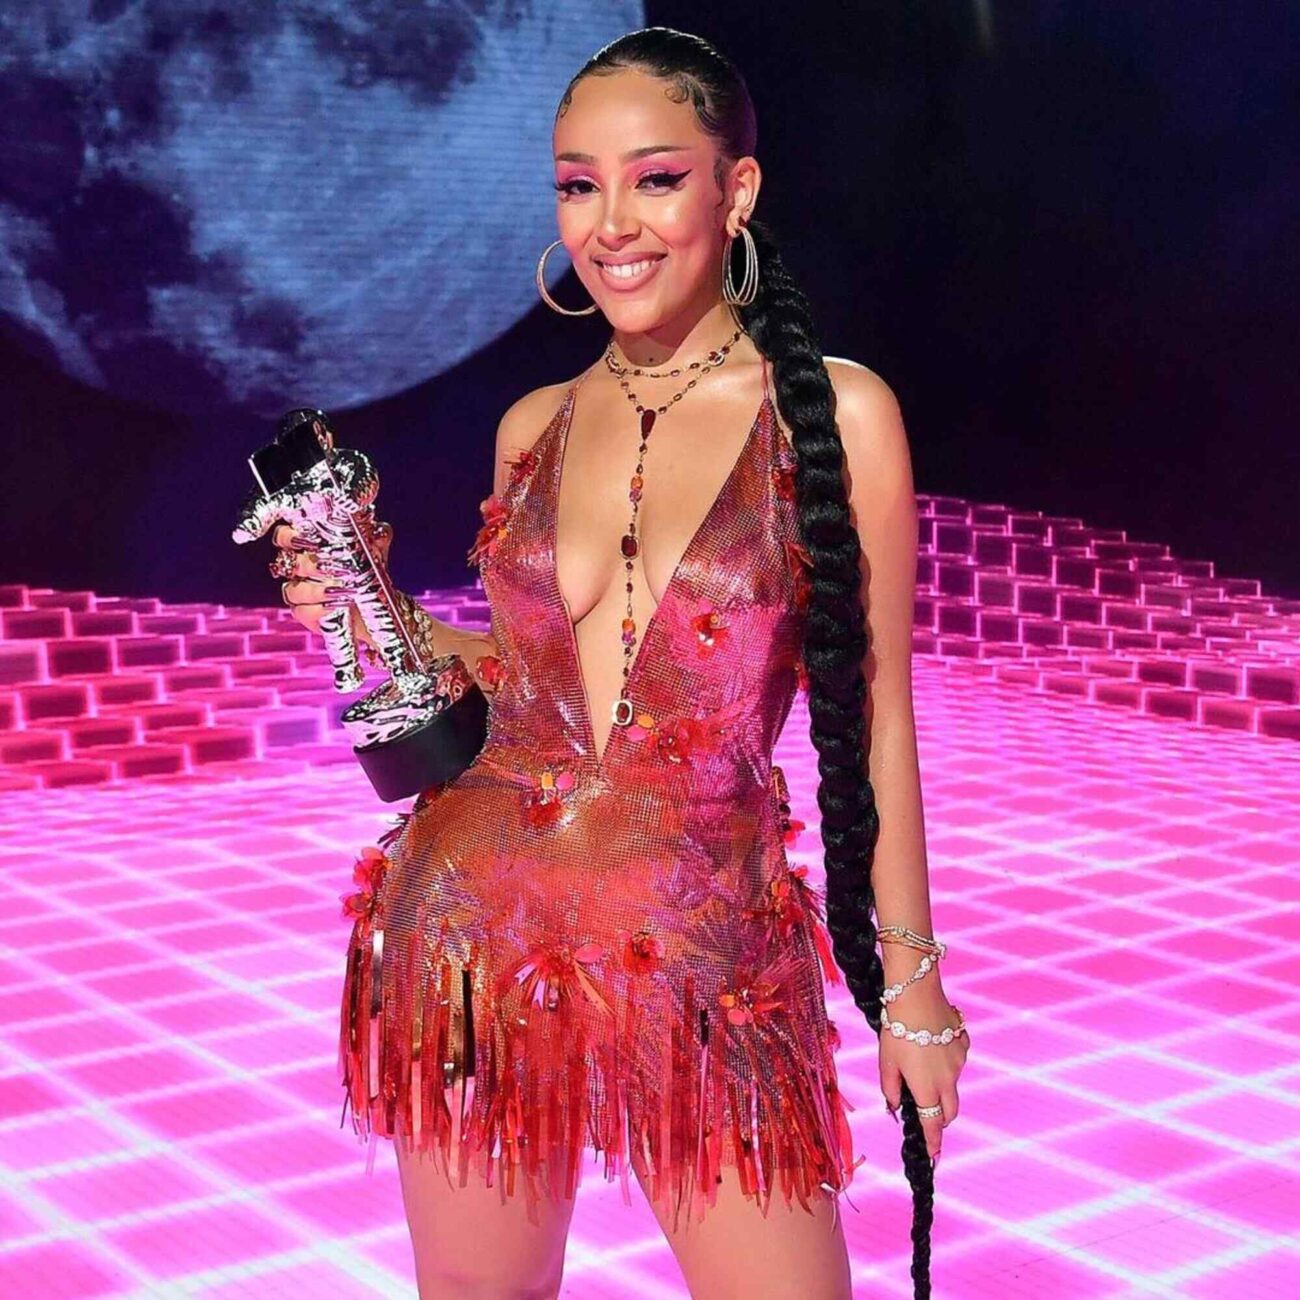 The MTV VMA awards is one of the biggest events in music each year, so which of your favorite artists can you expect to see? Find out all the deets here.